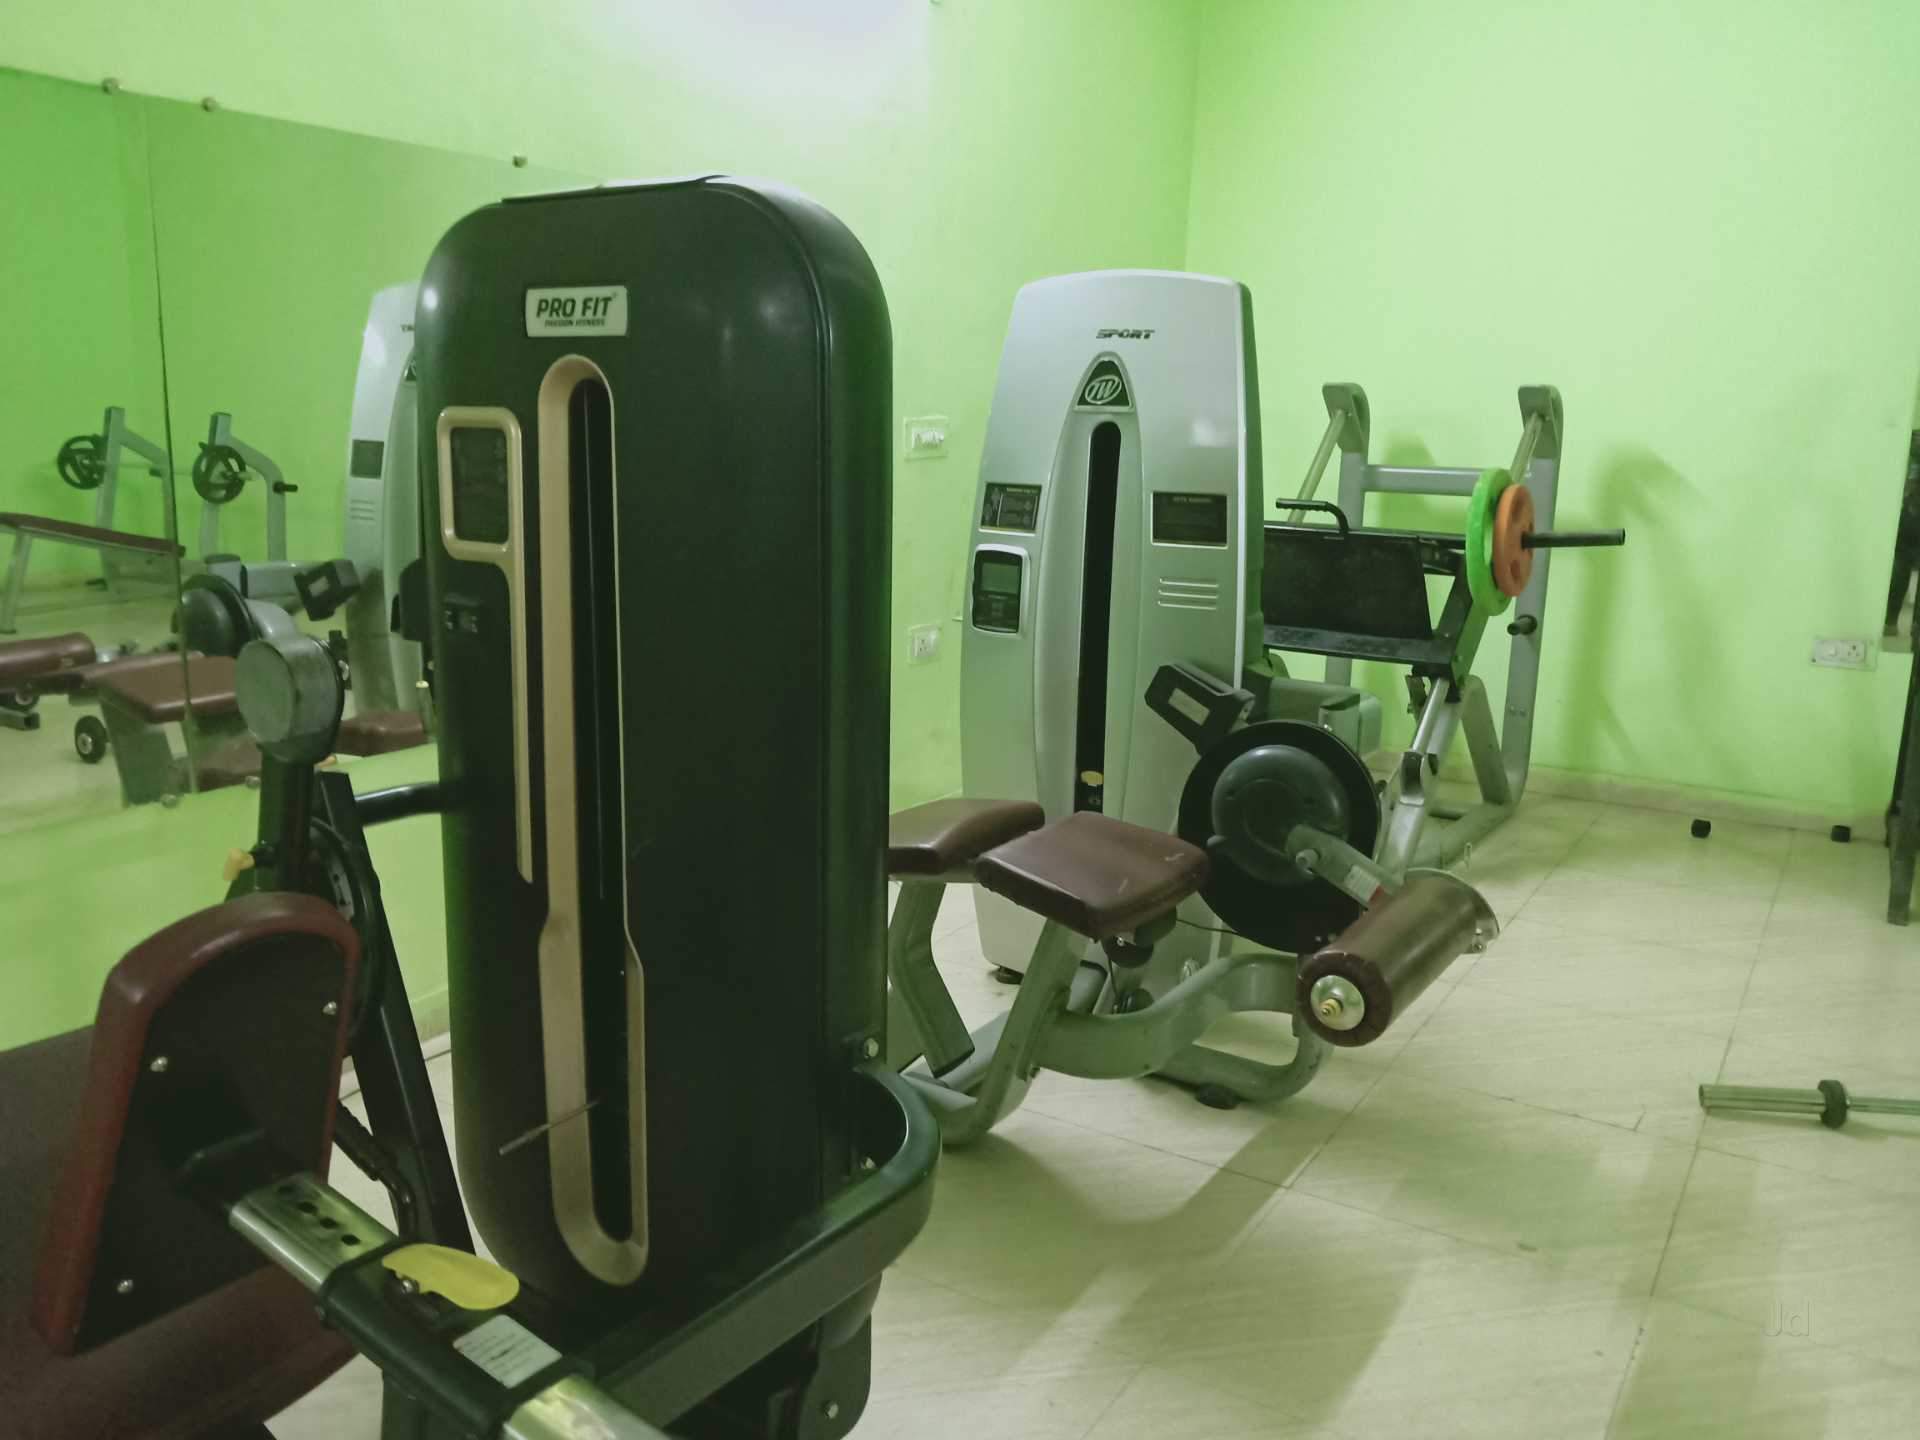 Noida-Sector-45-Your-fitness-factory_902_OTAy_MzEyNQ